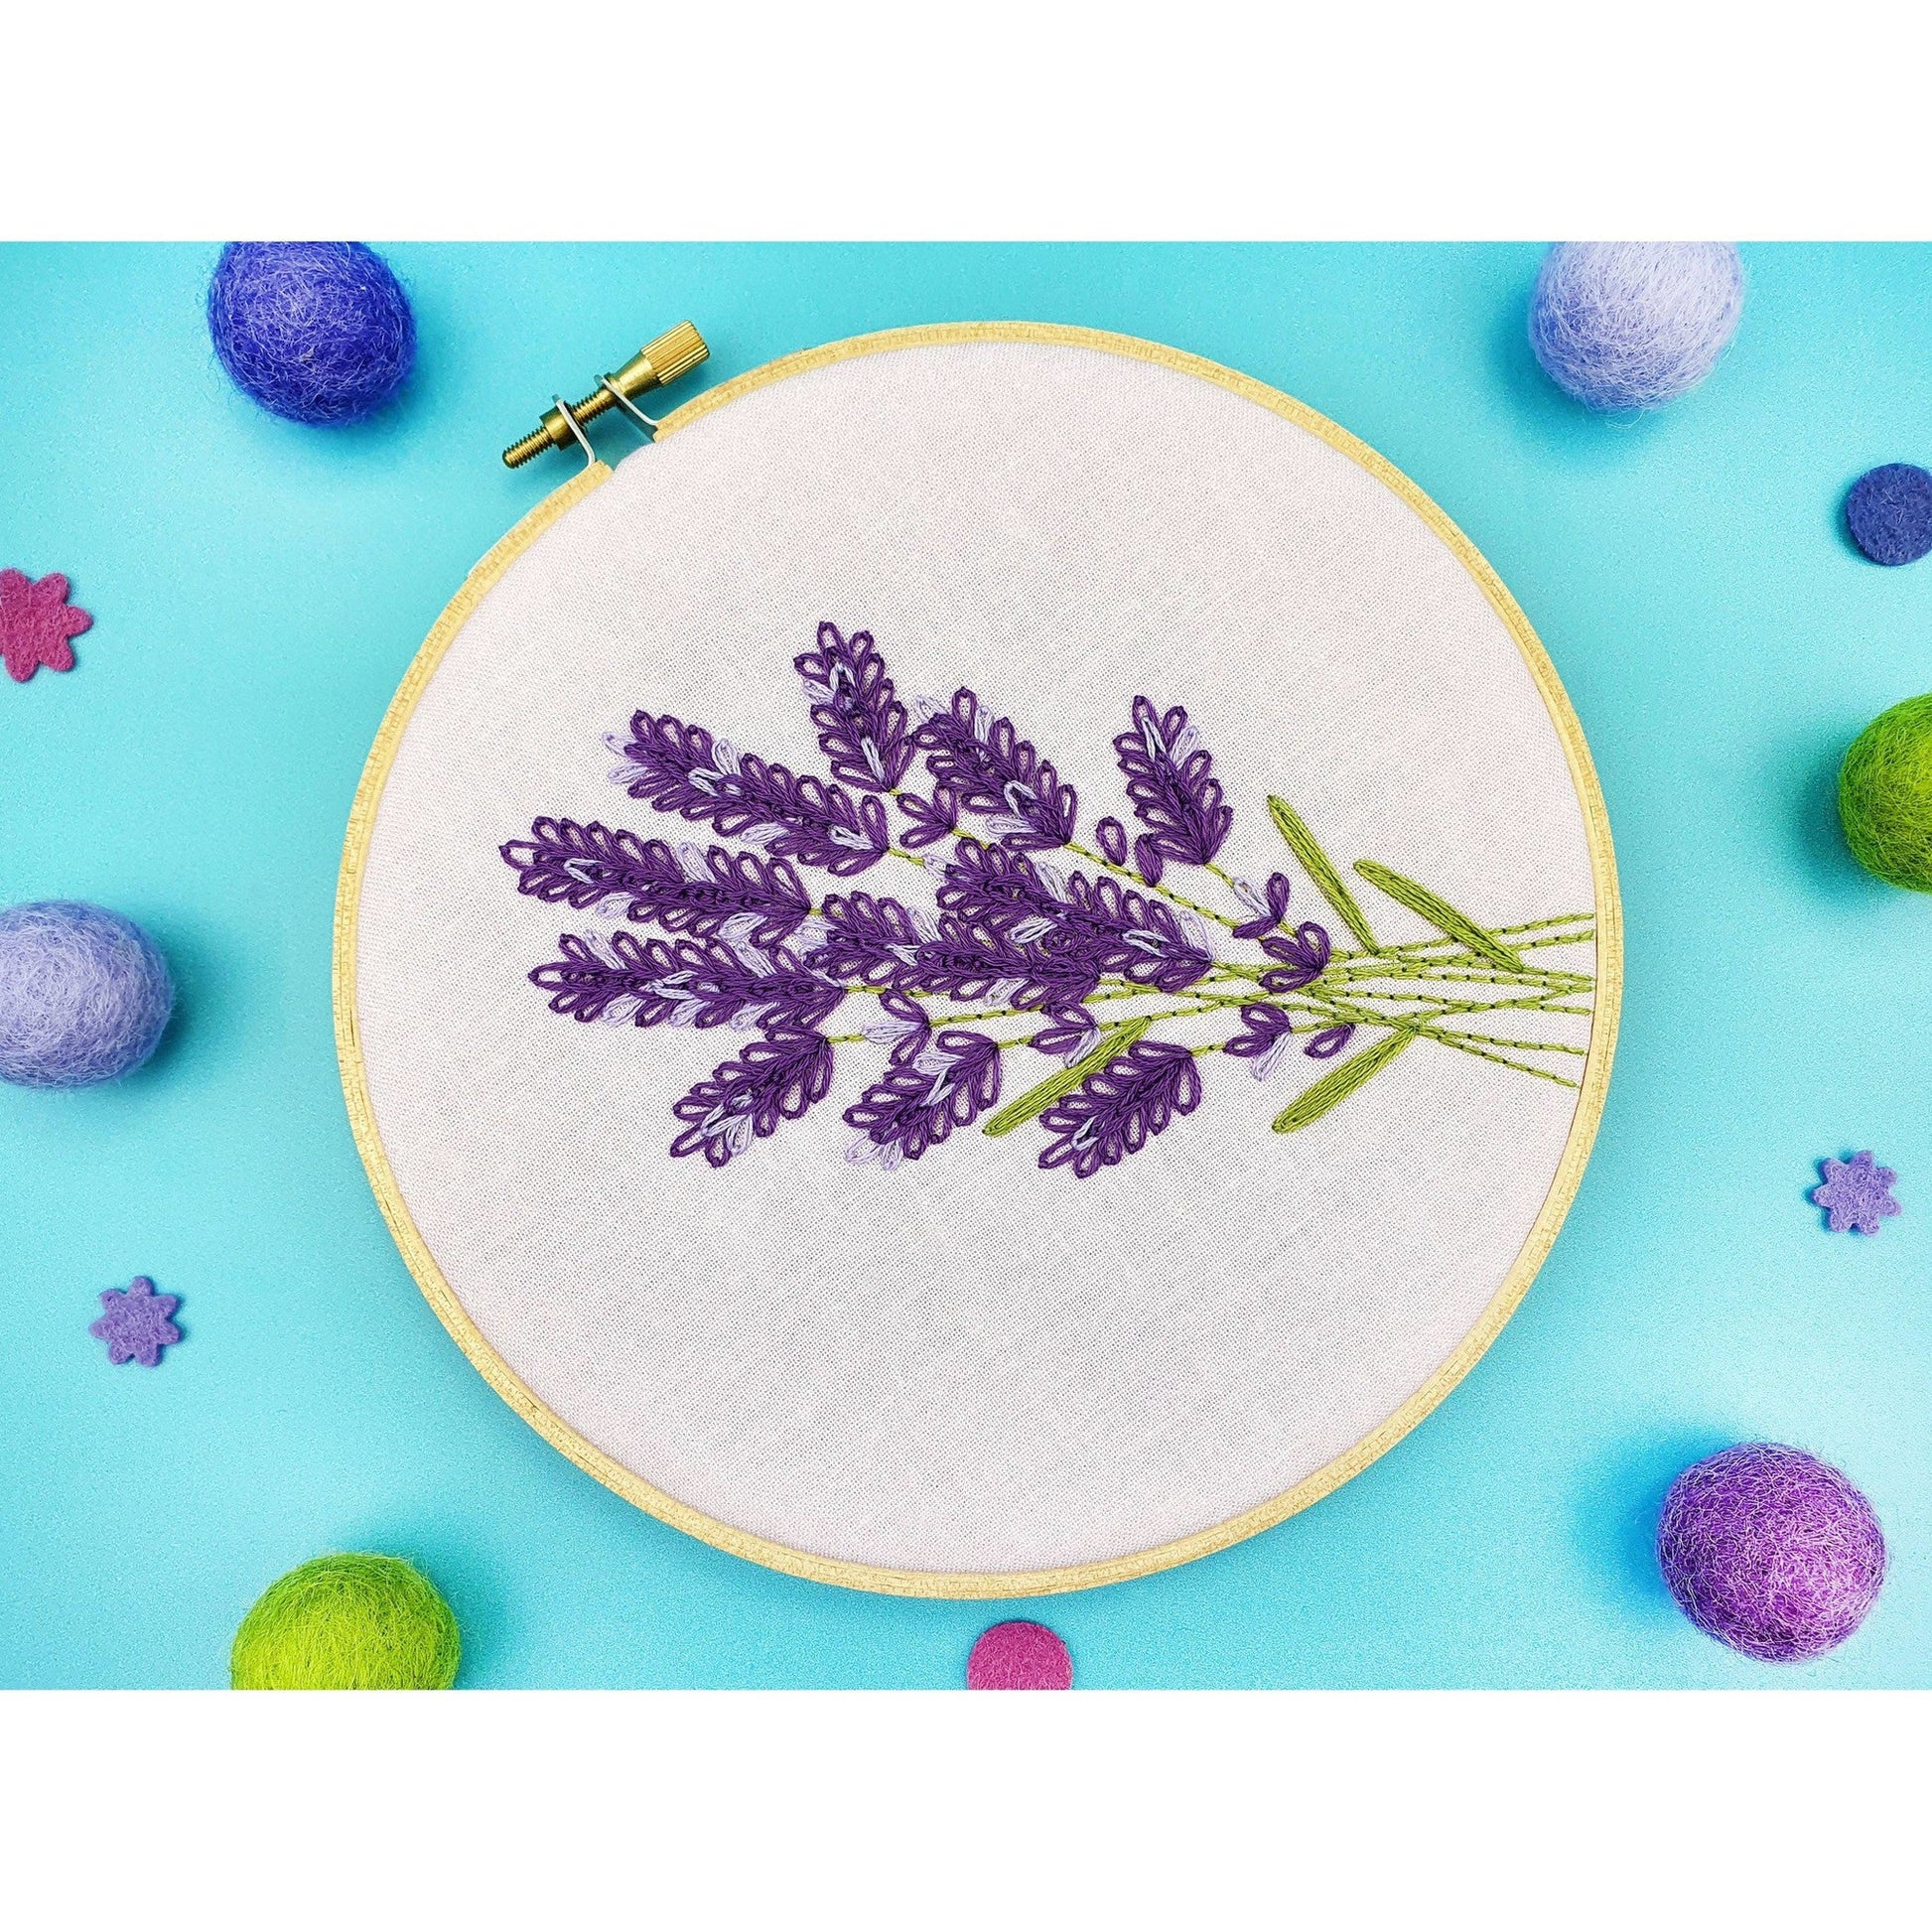  Quality Embroidery and Craft Products